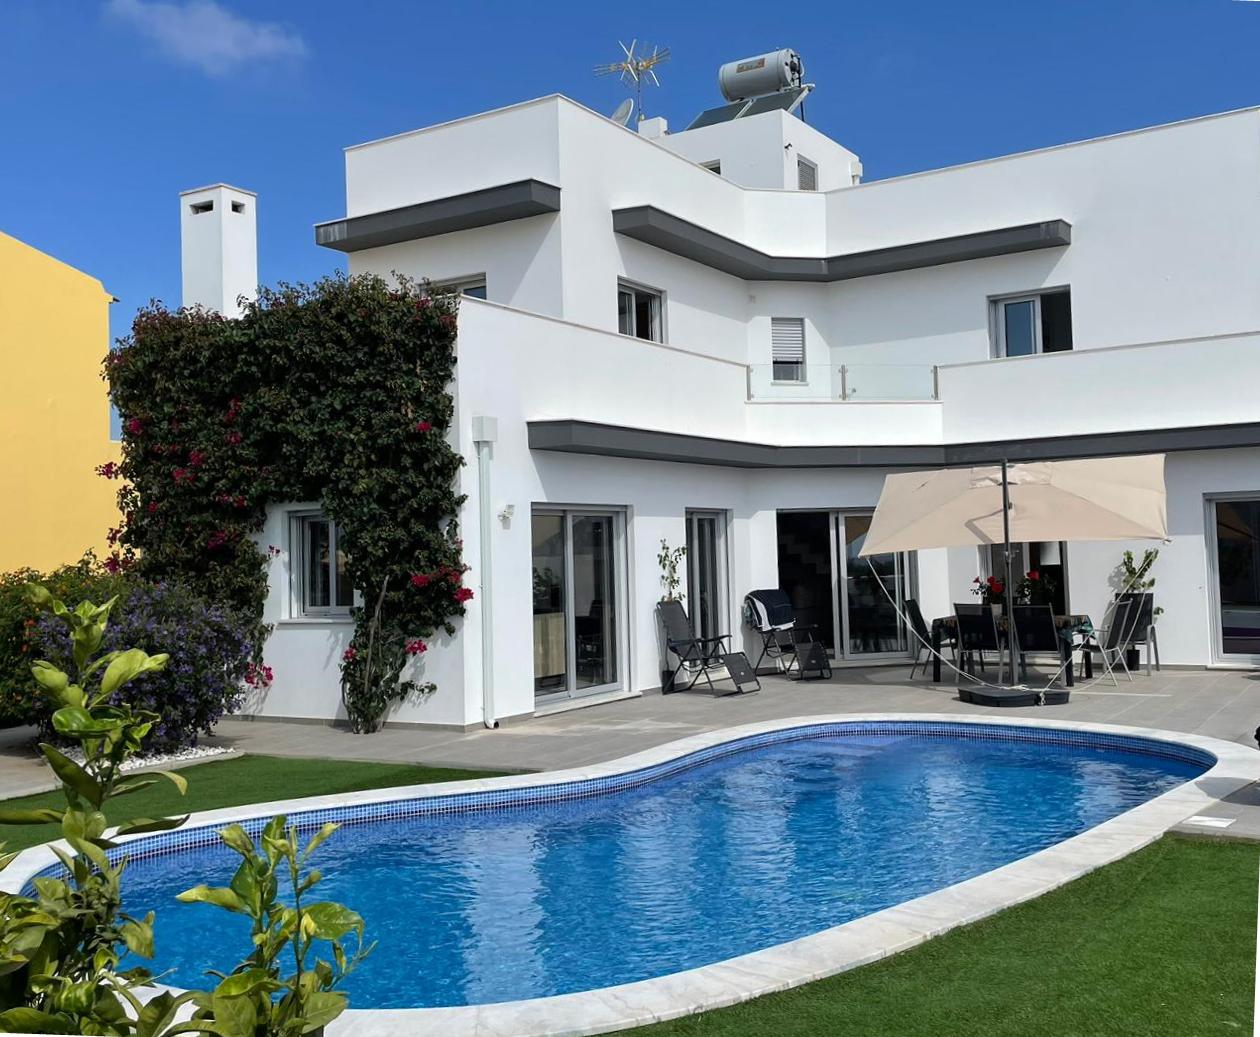 Property Image 1 - Villa Holley/Modern Villa with Private Pool & Views